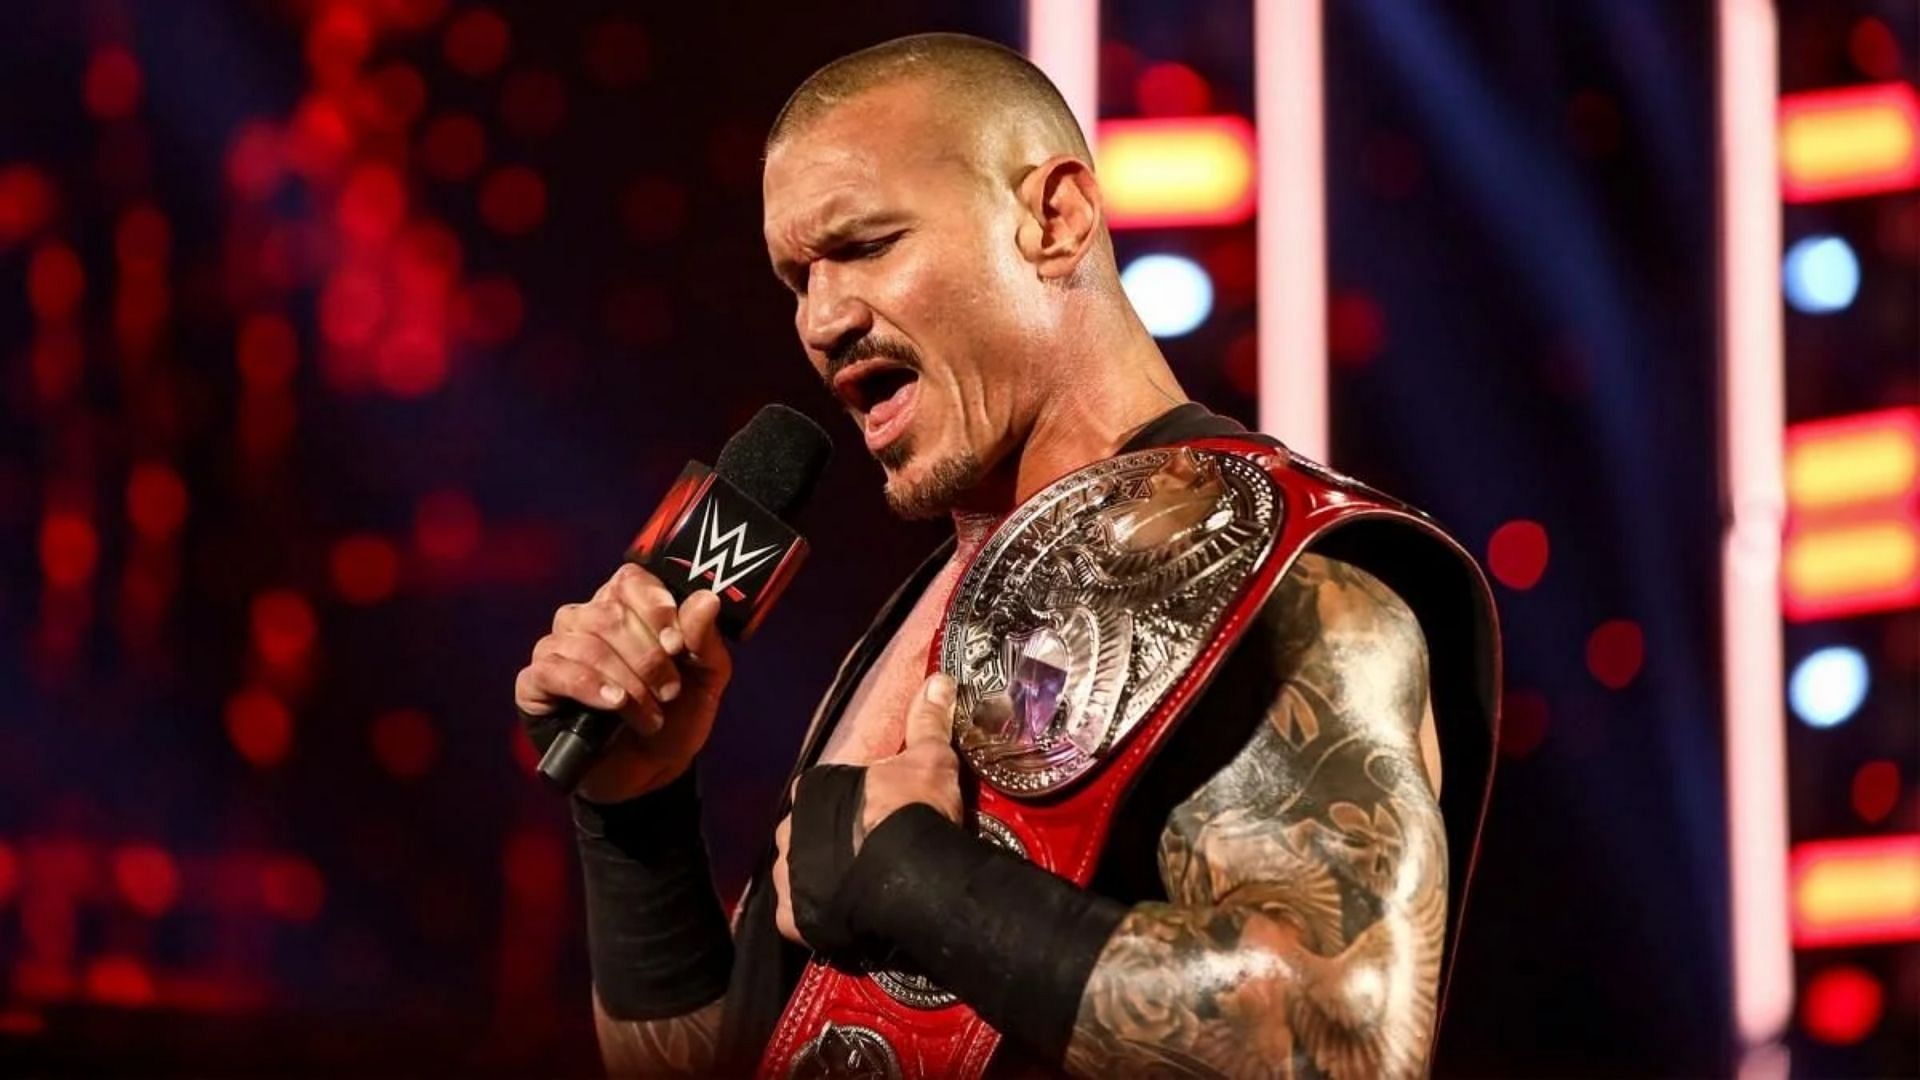 Randy Orton was last seen on WWE TV with the RAW Tag Team Championships